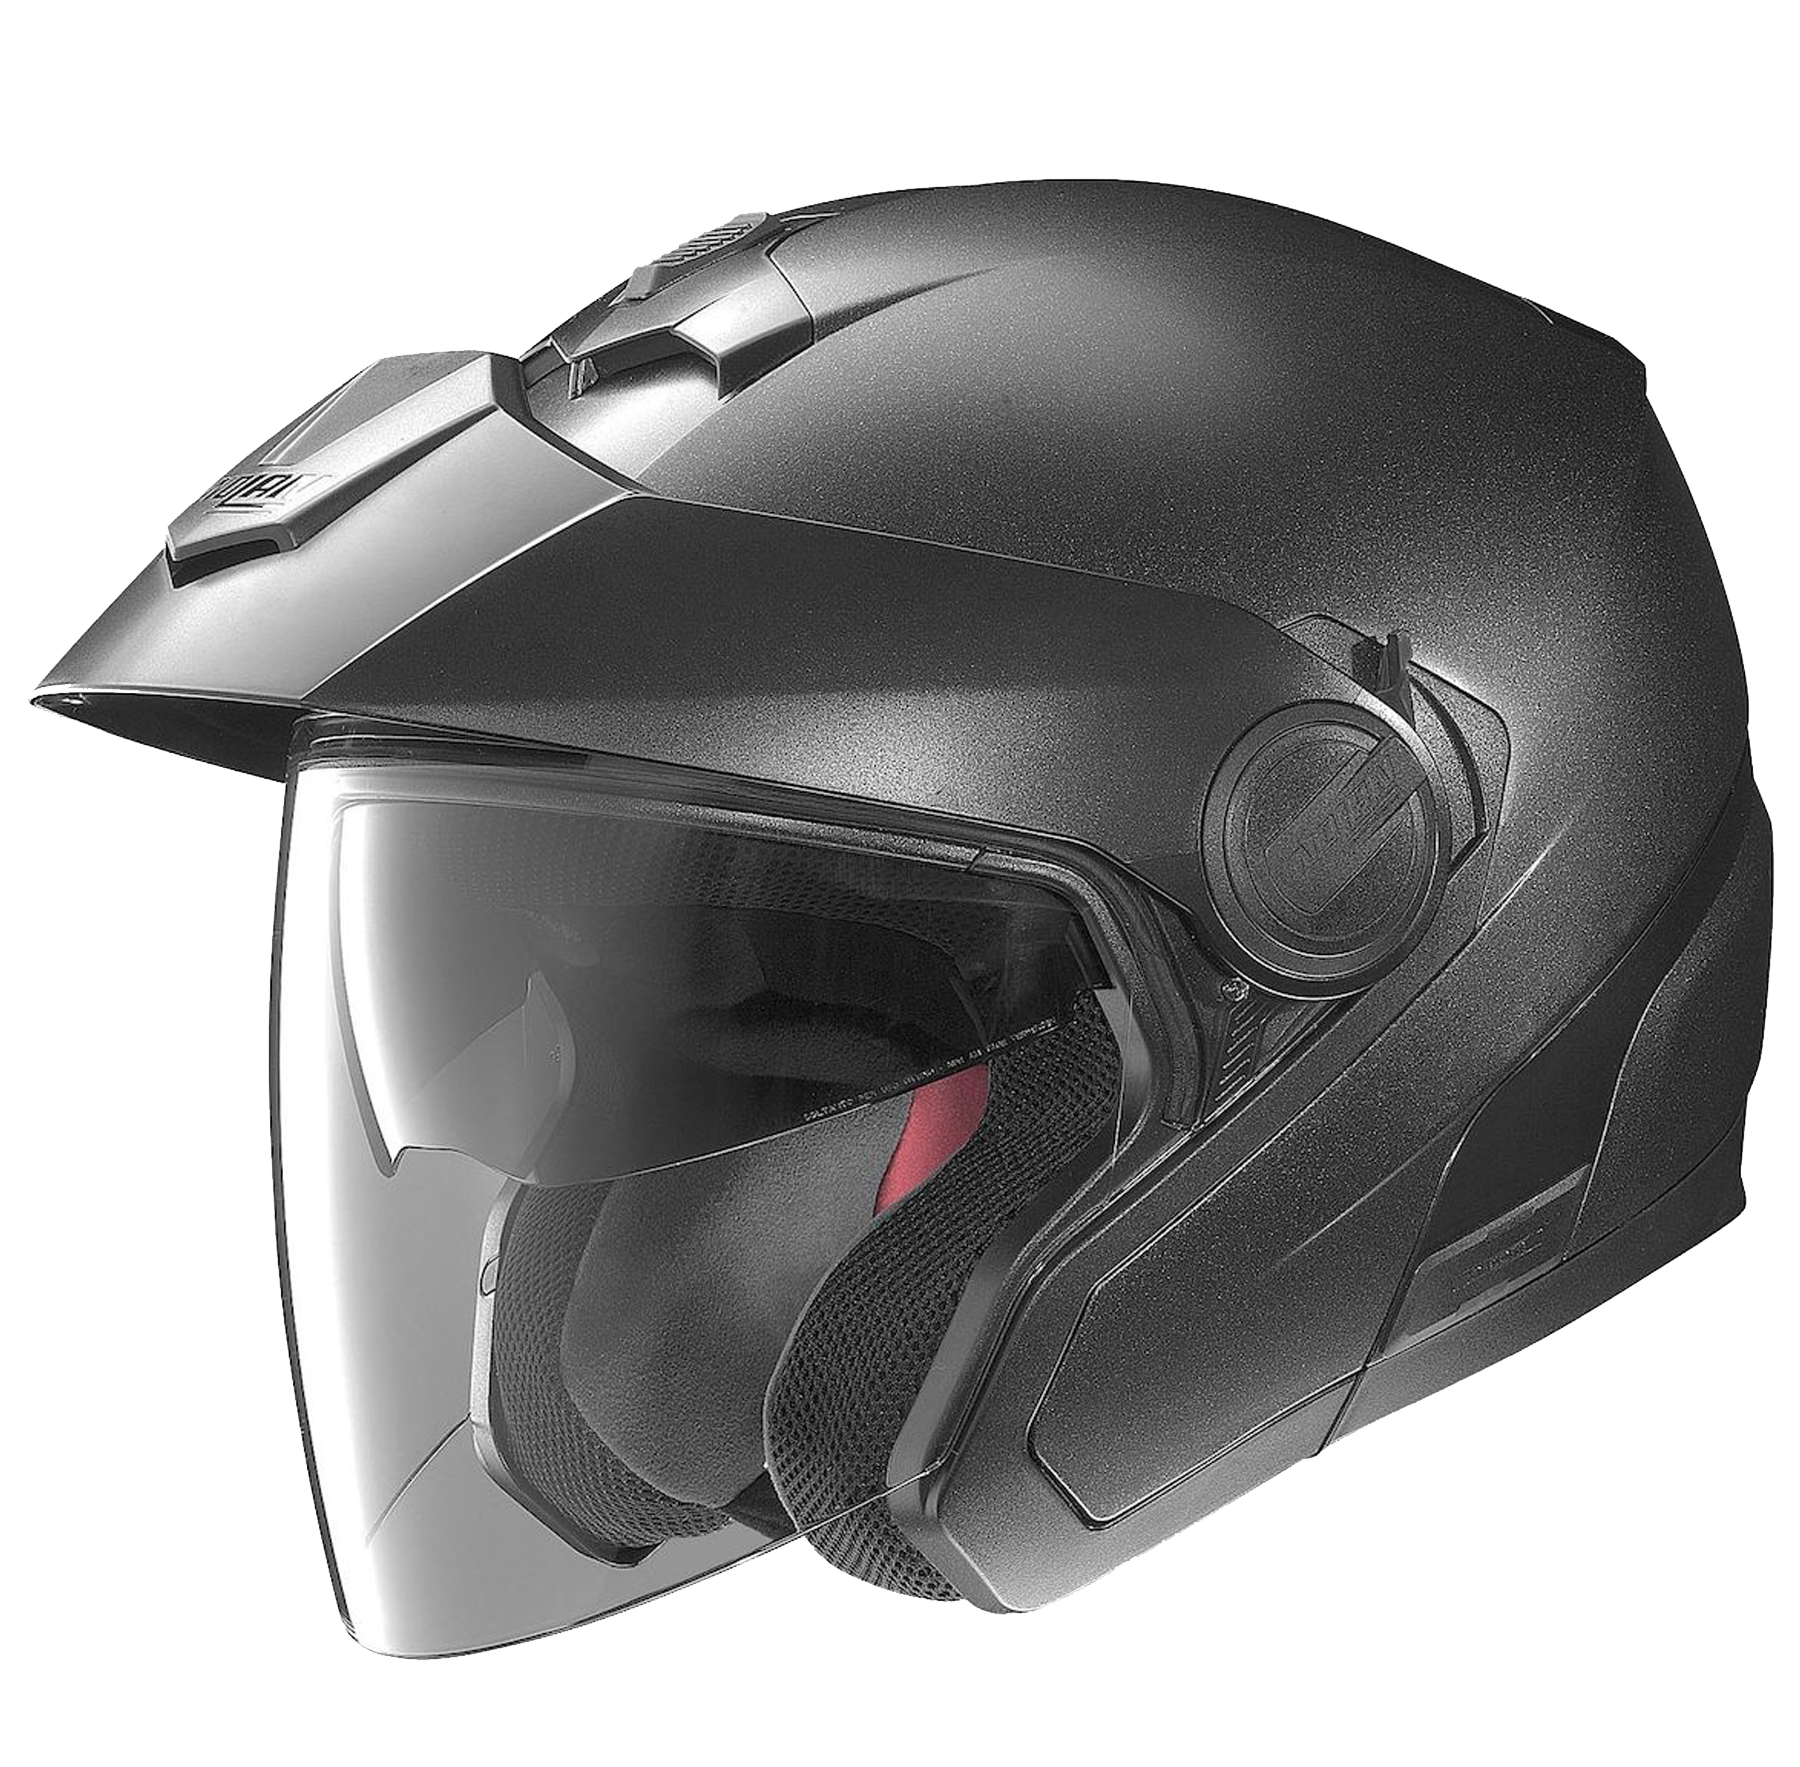 Best Open Face Helmets for Casual Style & Breathability